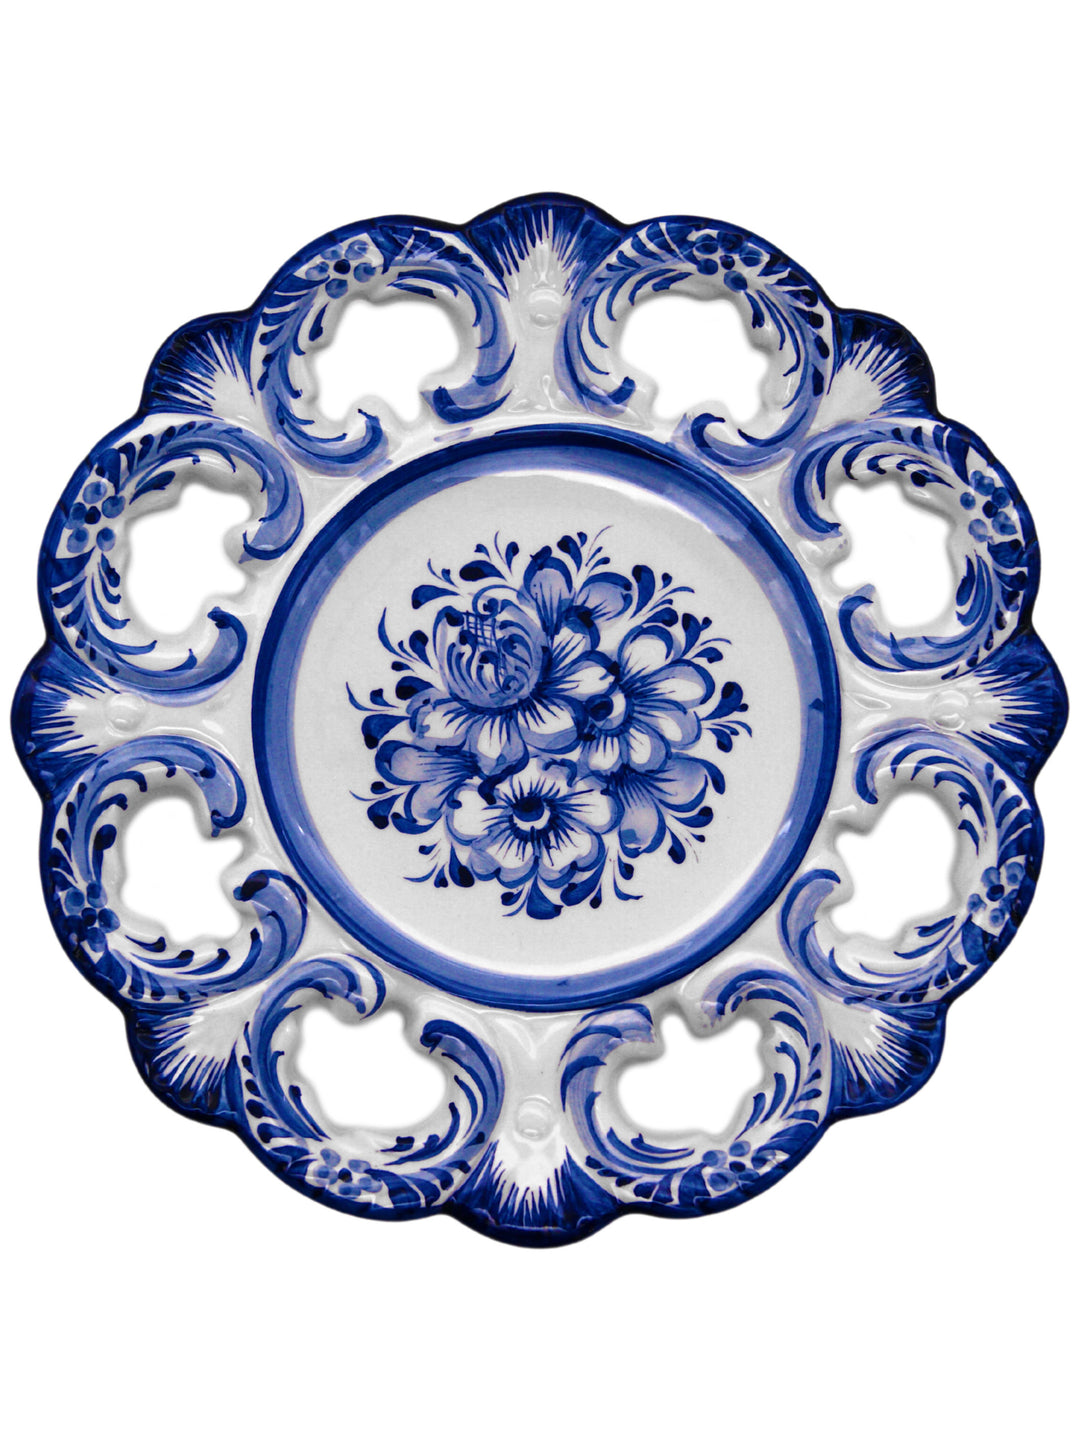 10 Inch Hand painted Blue & White Portuguese Ceramic Wall Décor Hanging Plate